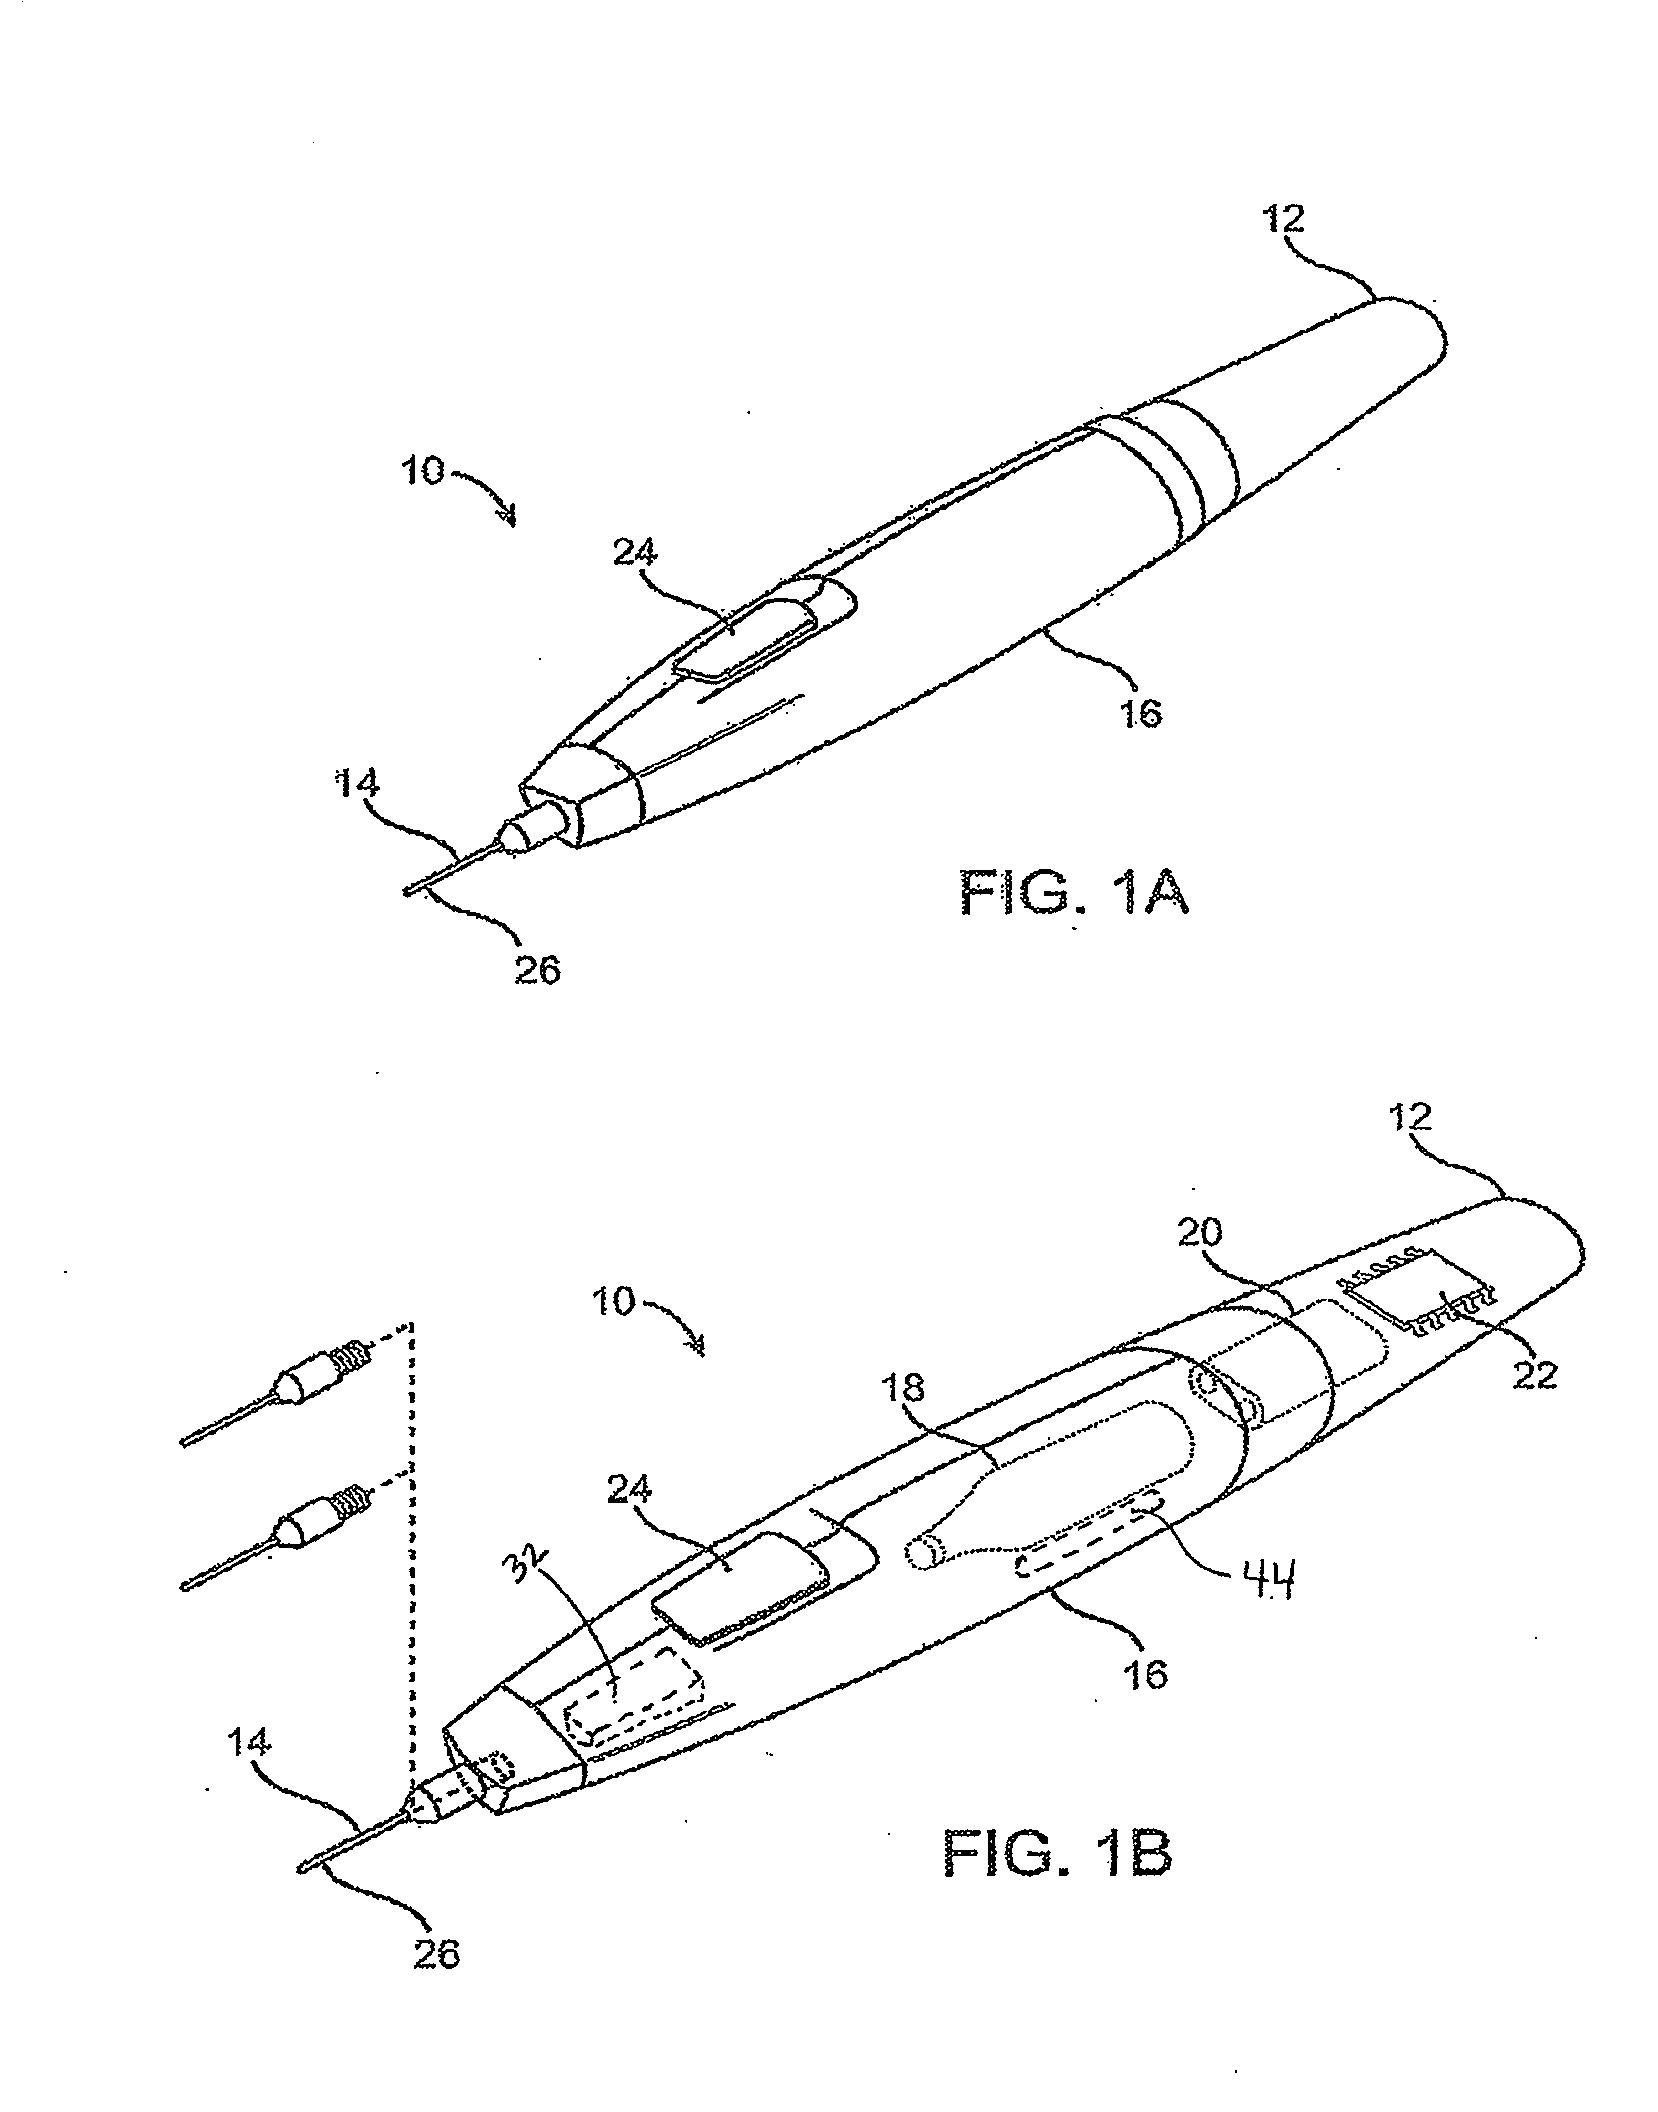 Integrated cryosurgical system with refrigerant and electrical power source